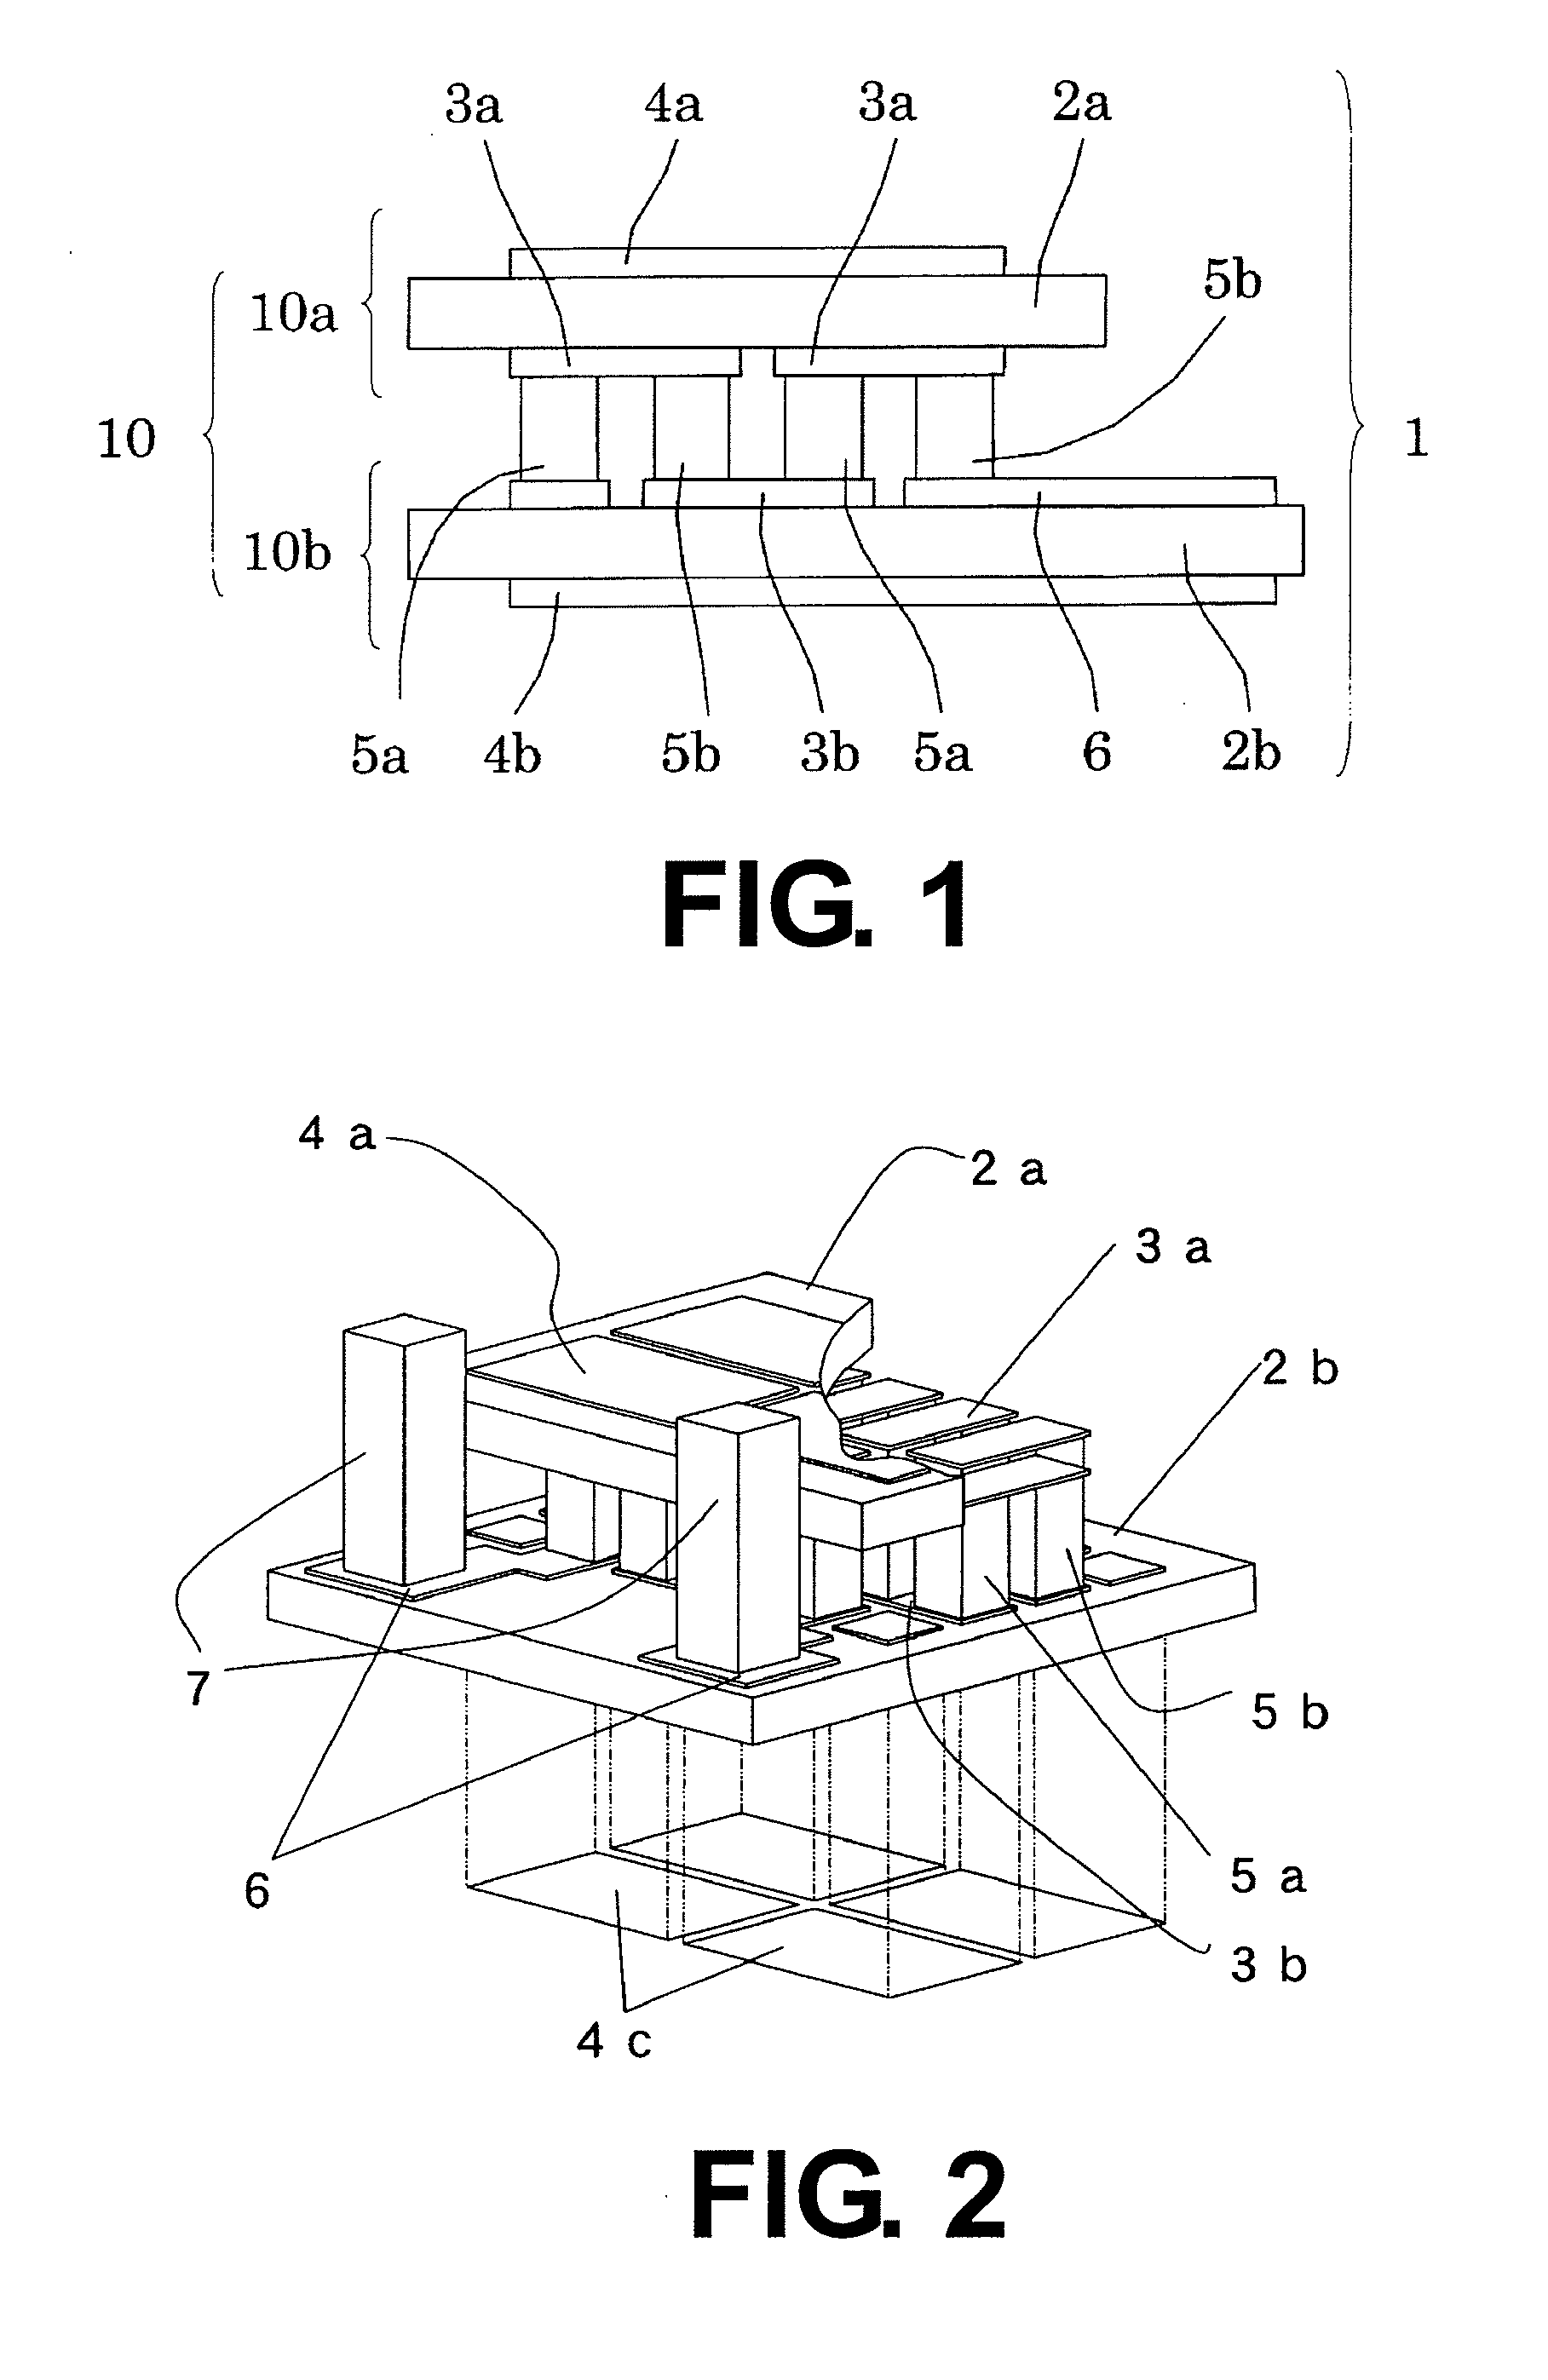 Thermoelectric module and metallized substrate